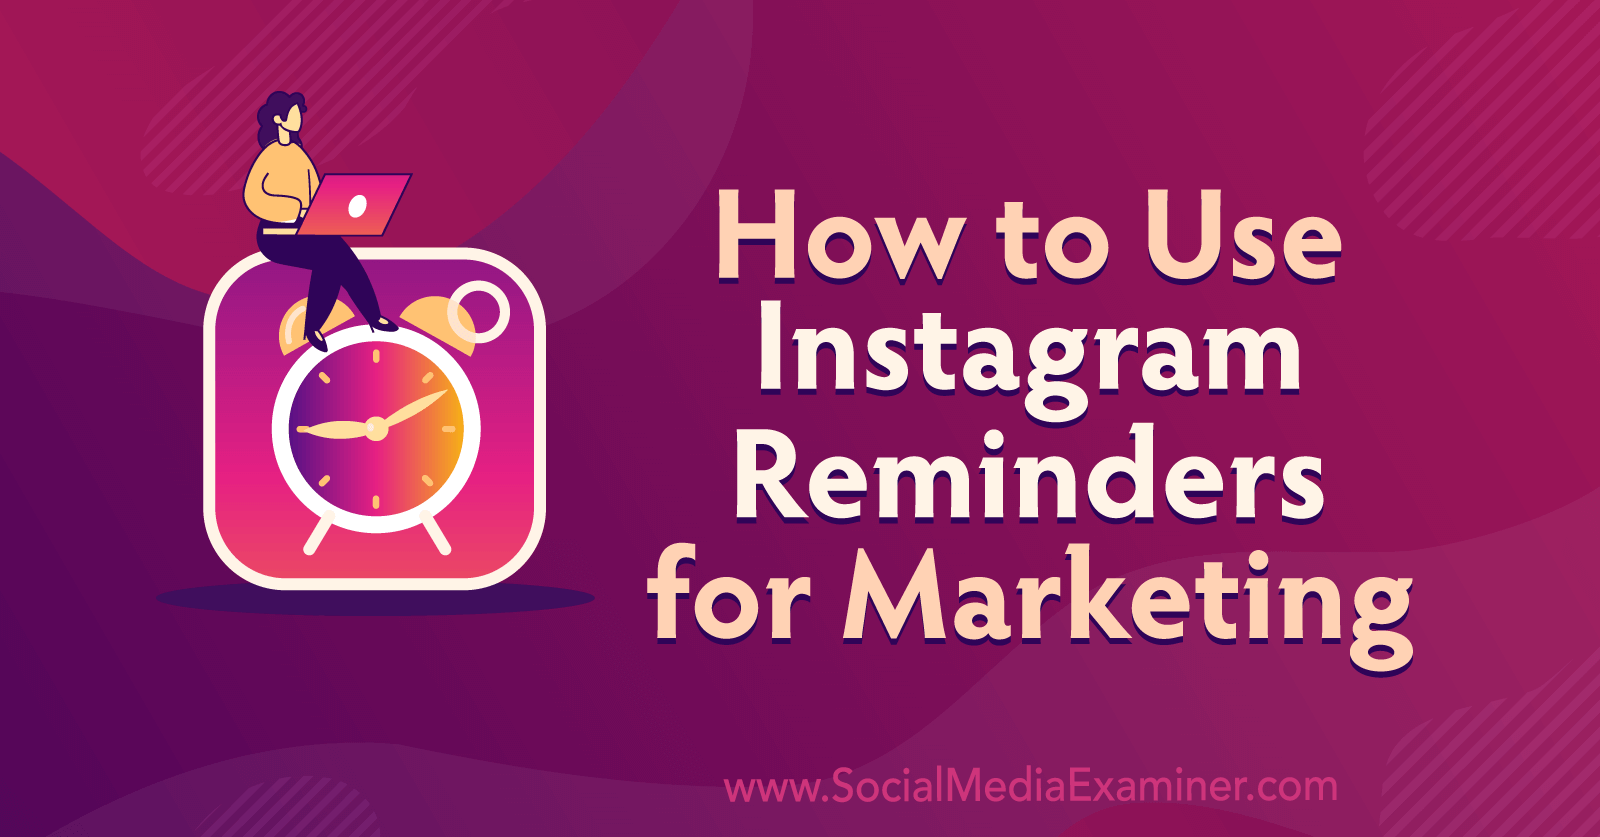 How to Use Instagram Reminders for Marketing by Anna Sonnenberg on Social Media Examiner.